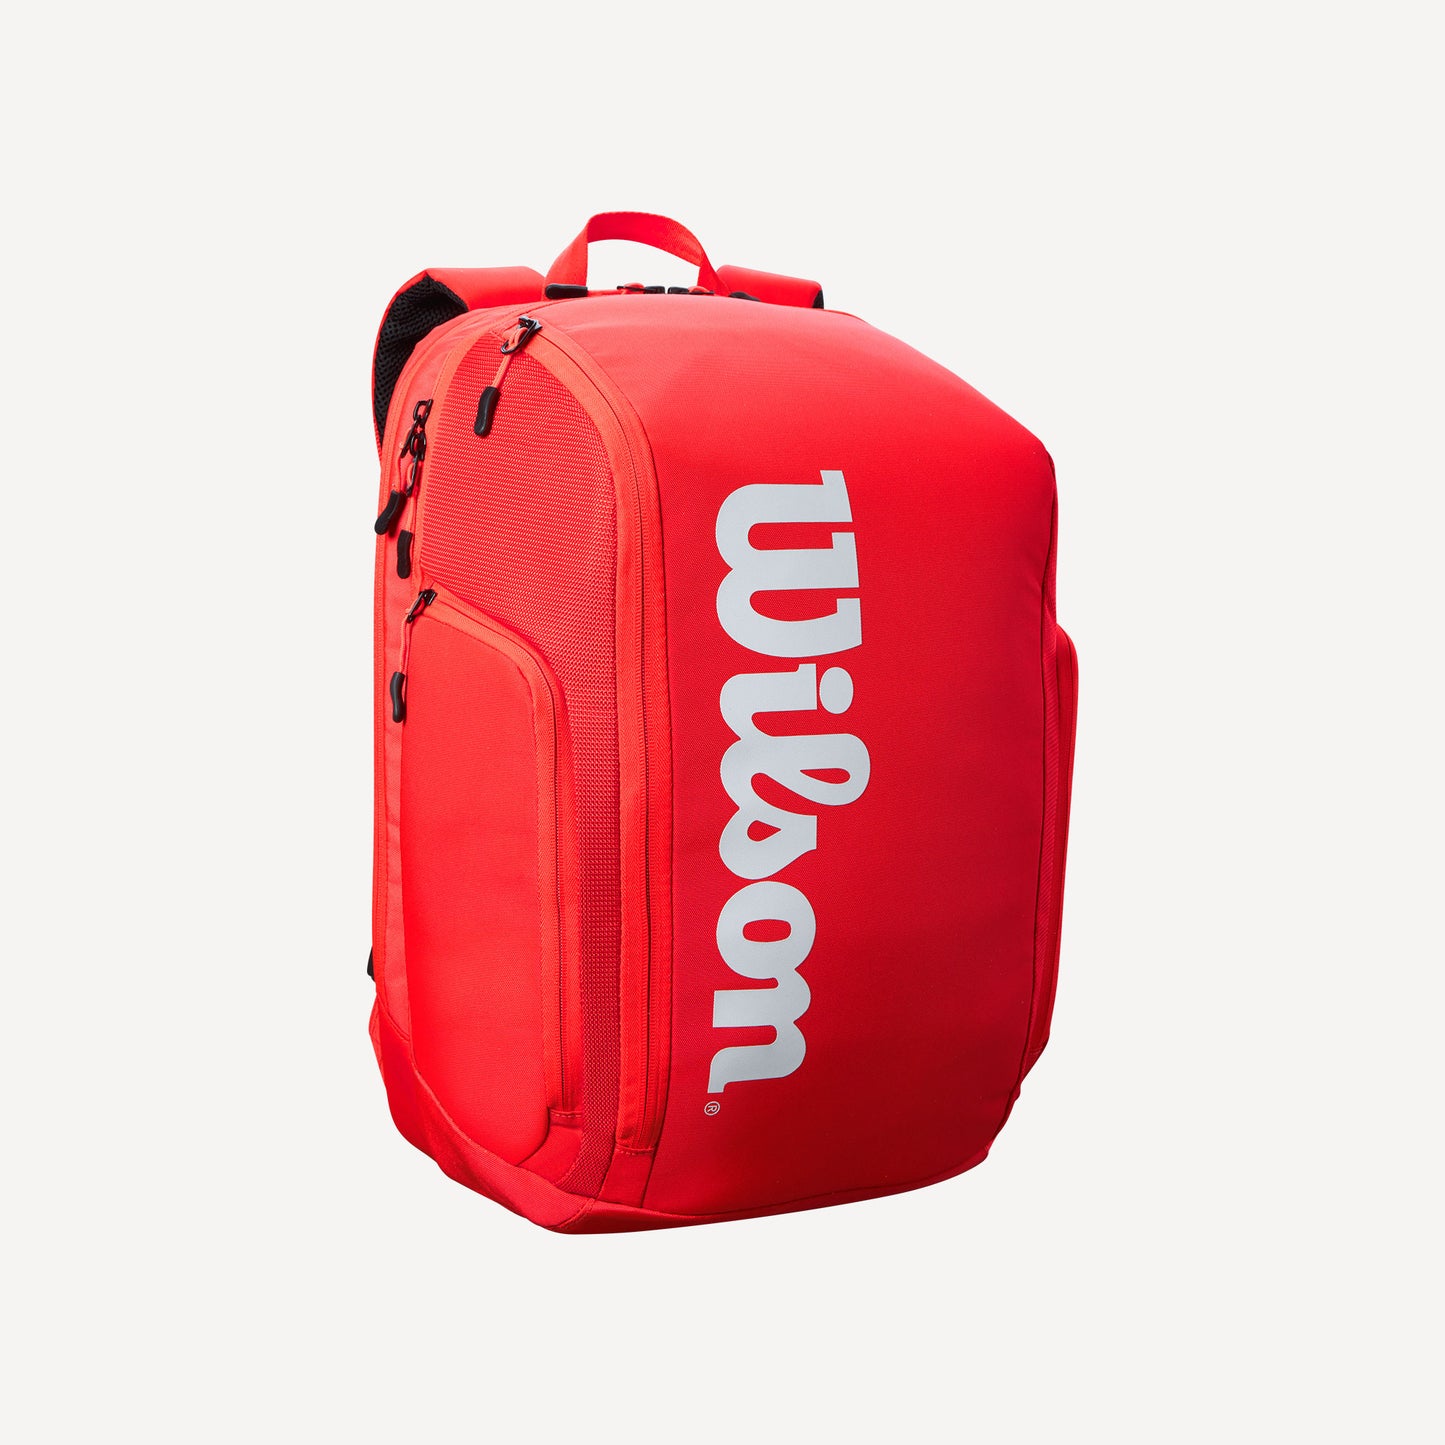 Wilson Super Tour Tennis Backpack Red (1)